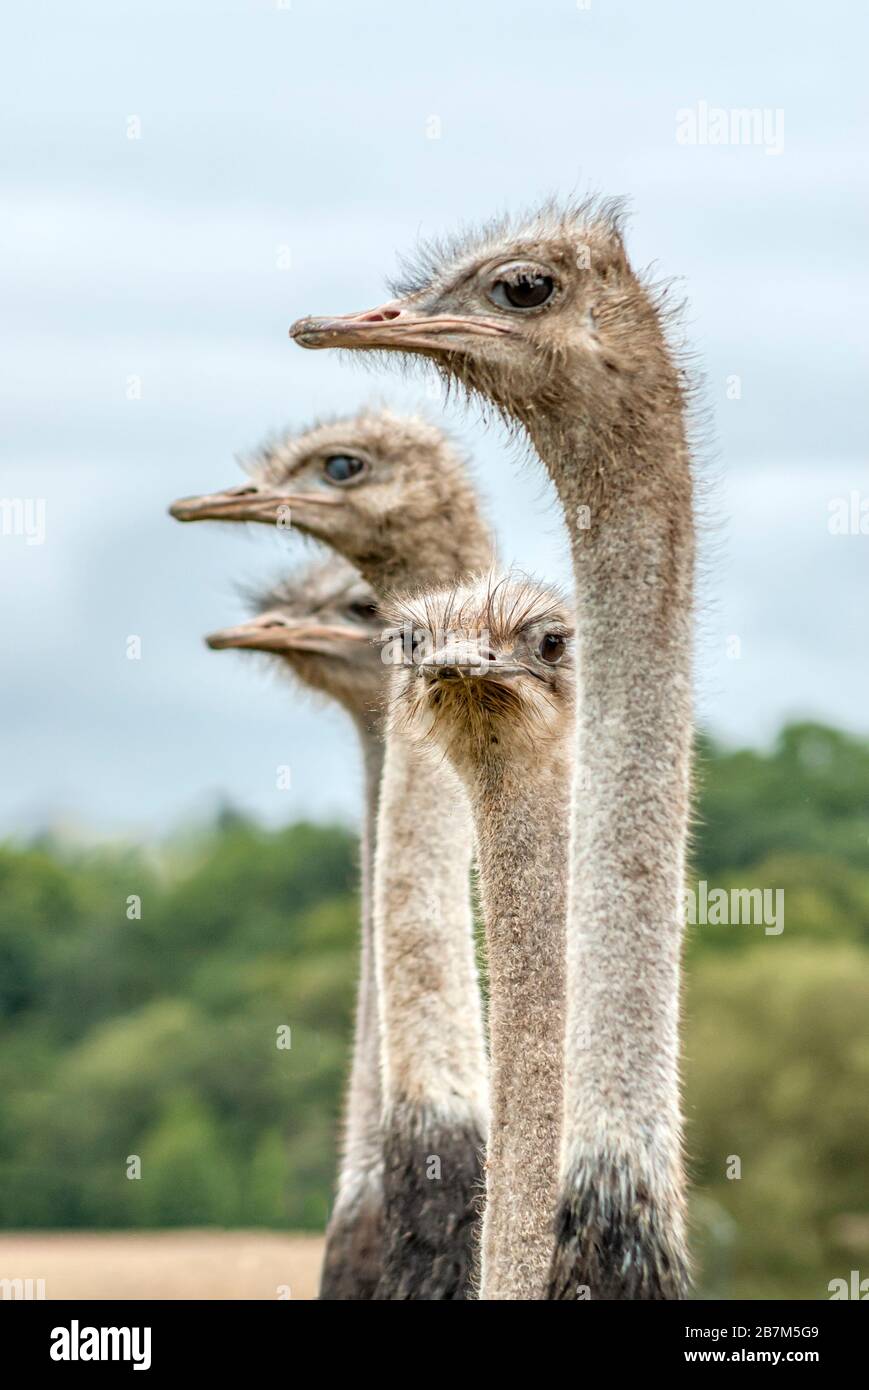 Group of adult Ostrich at the ostrich farm Striegistal in Saxony, Germany Stock Photo